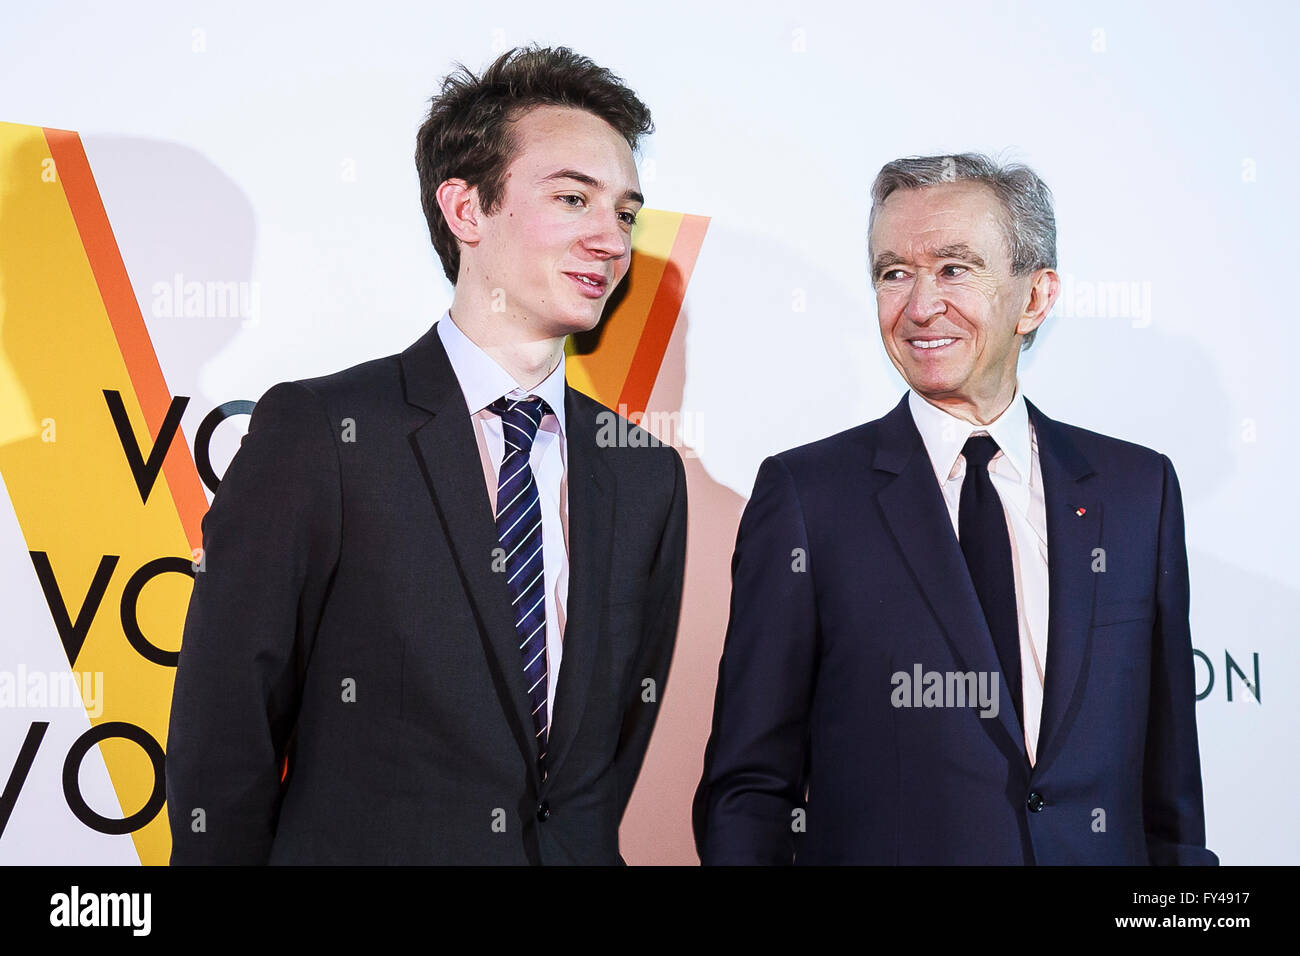 LVMH luxury group's chairman, Bernard Arnault poses with his son: TAG  Photo d'actualité - Getty Images